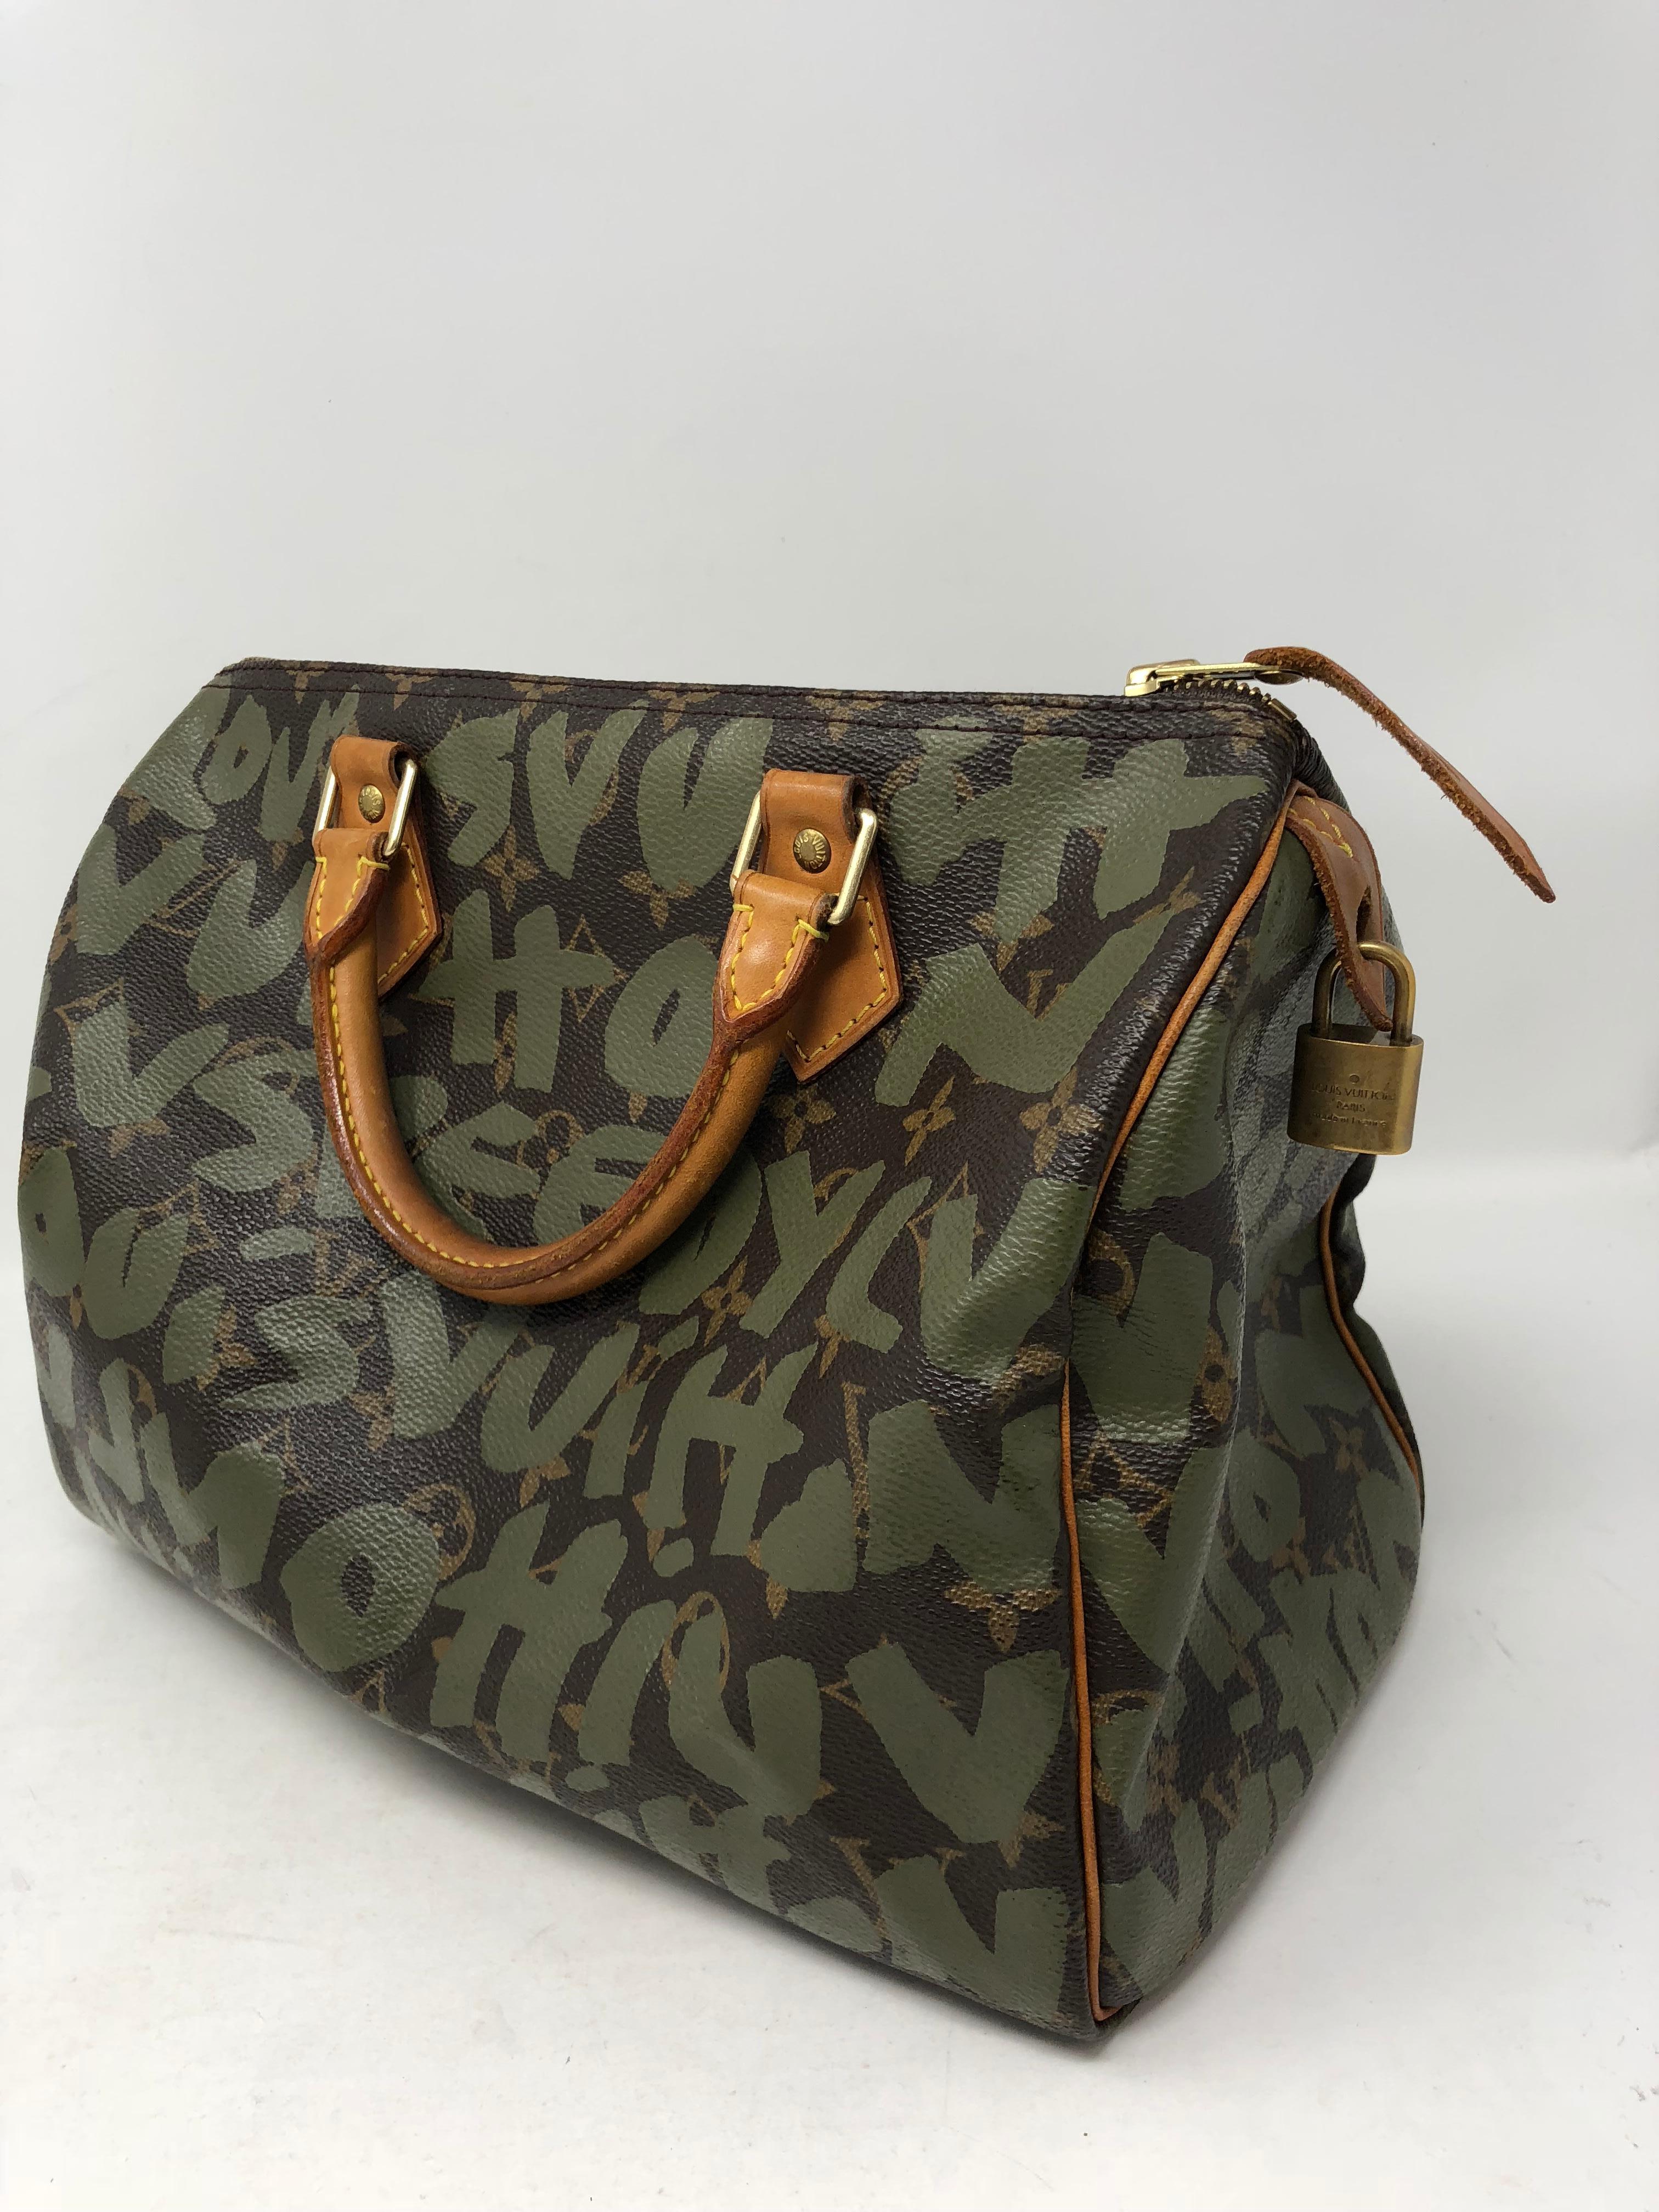 Louis Vuitton Stephen Sprouse Graffiti Speedy Bag in green camouflage. Rare and iconic for the LV collector. Sprouse art bag is in good condition. Size Speedy 30. Don't miss out on this one. Guaranteed authentic. 